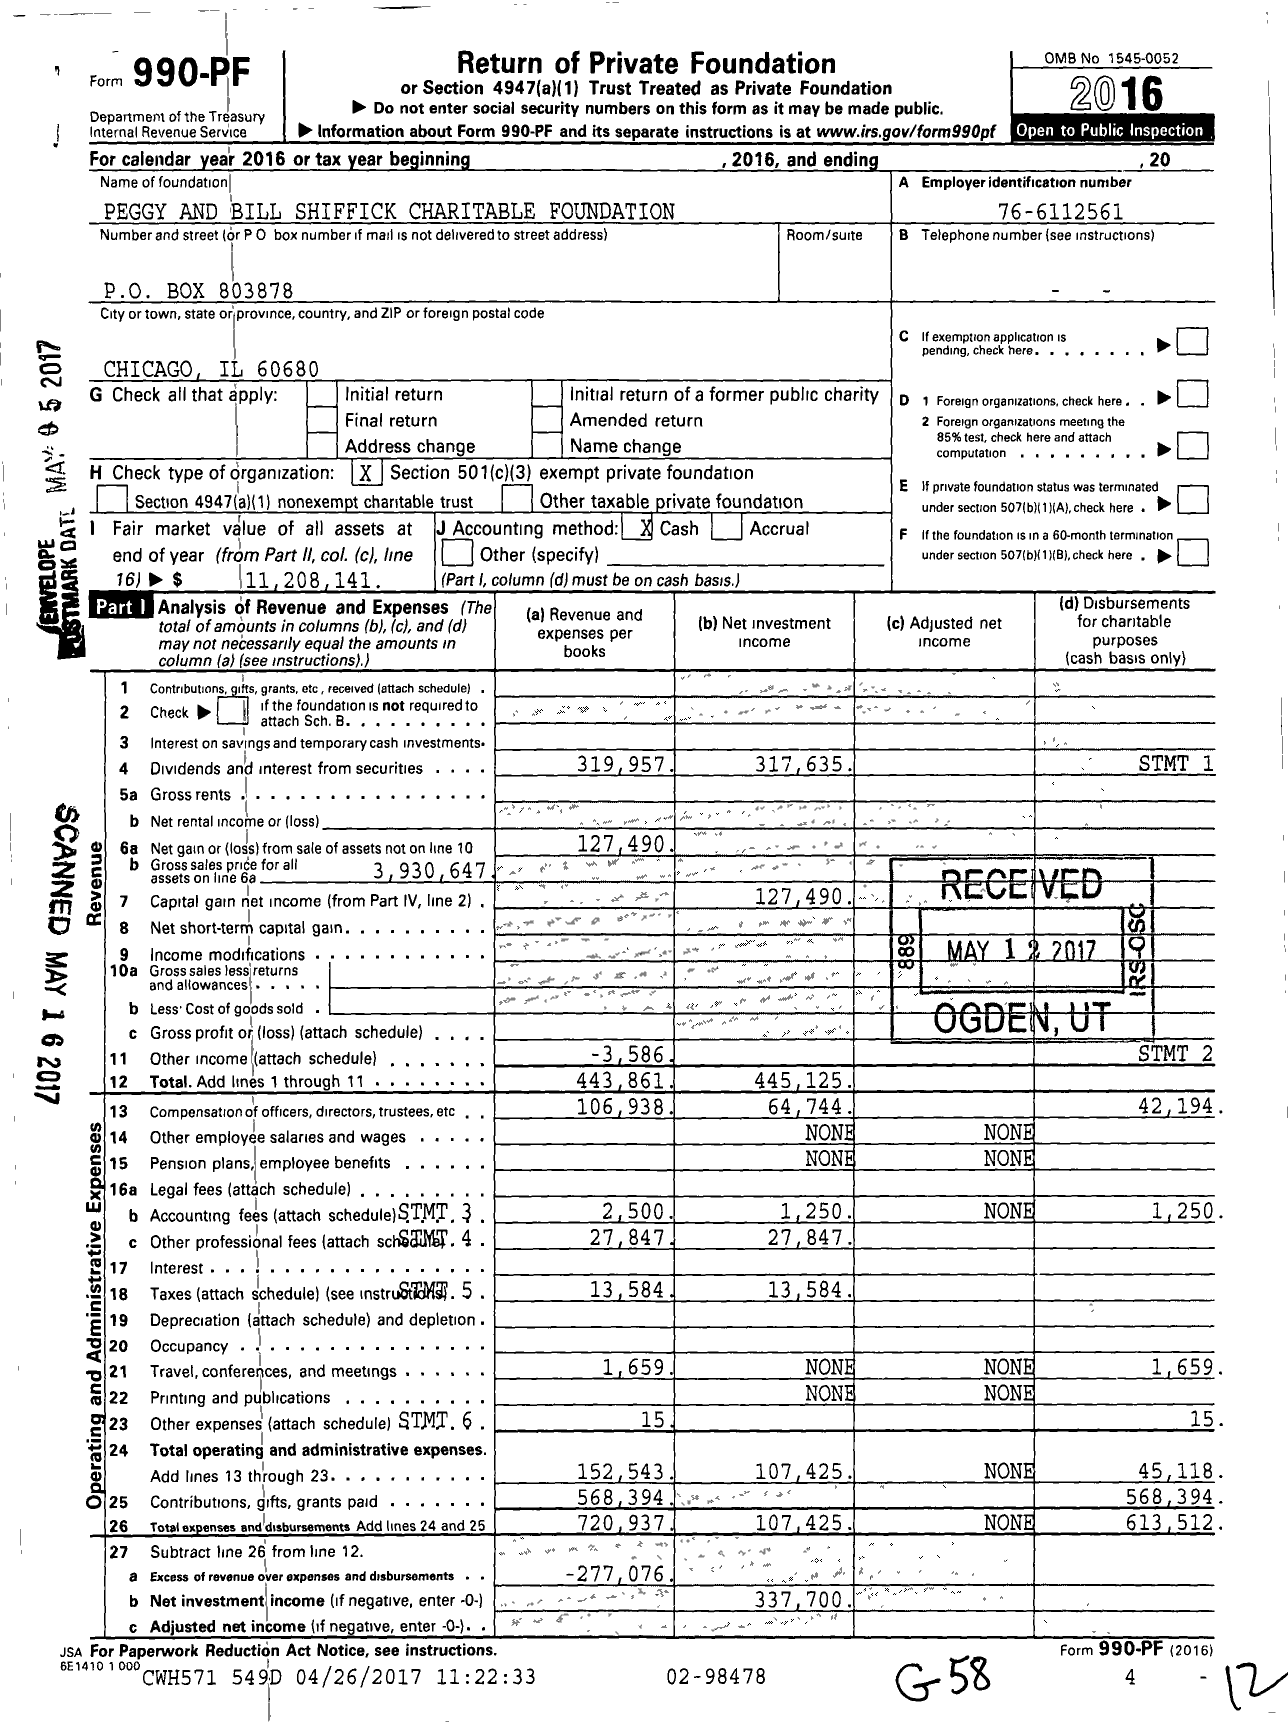 Image of first page of 2016 Form 990PF for Peggy and Bill Shiffick Charitable Foundation